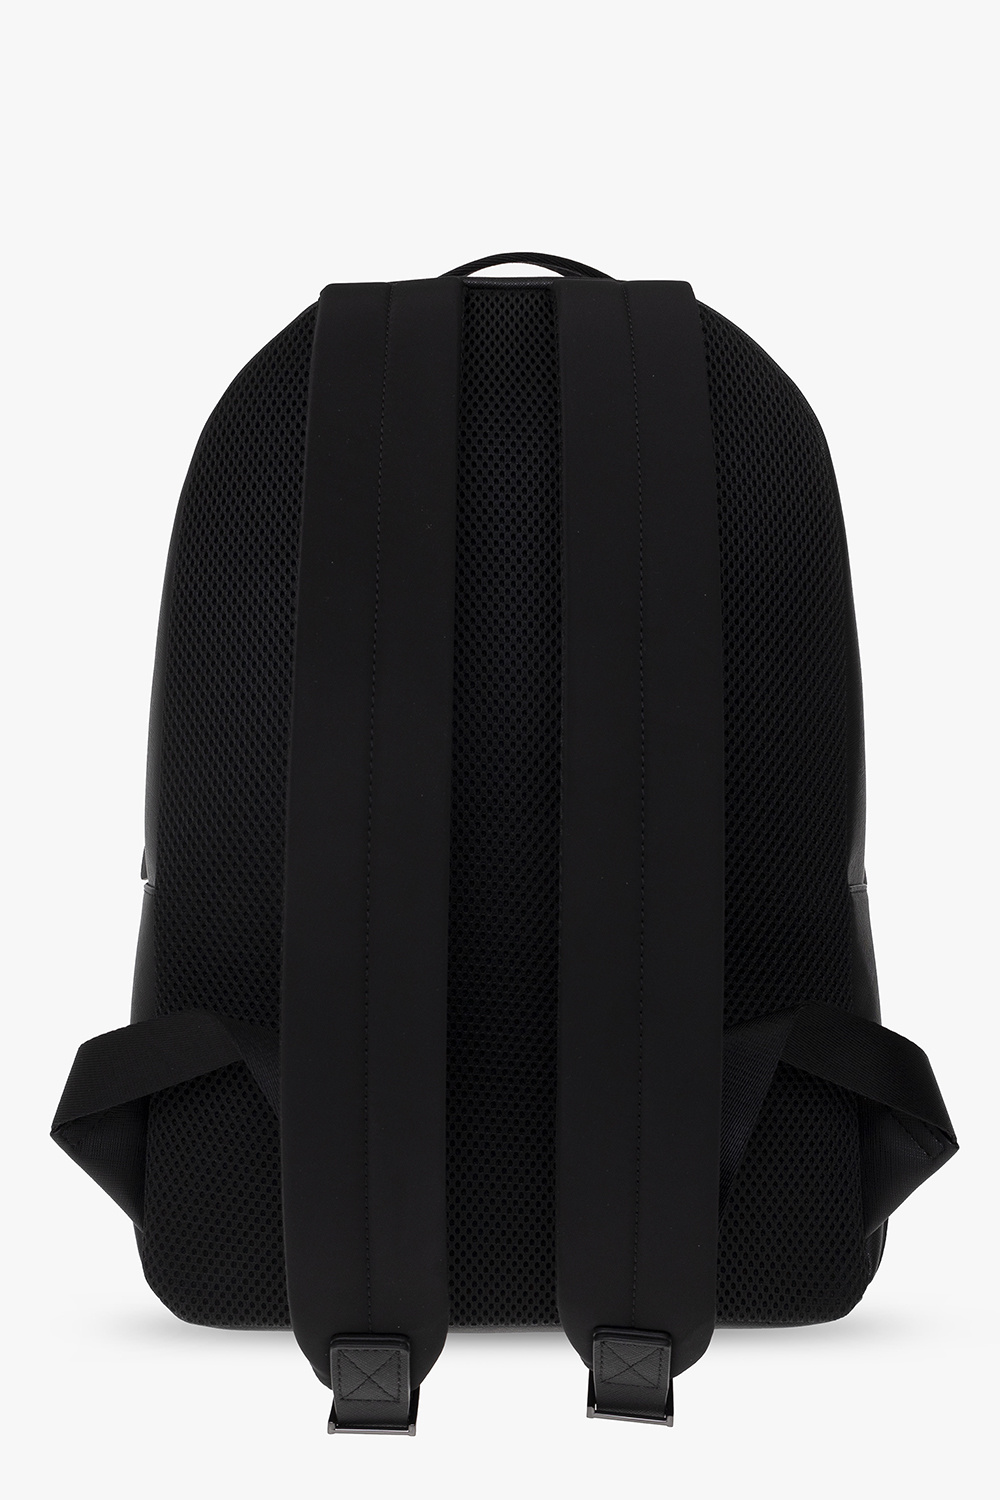 Backpack from the ‘Sustainable’ collection Emporio Armani - Vitkac Germany